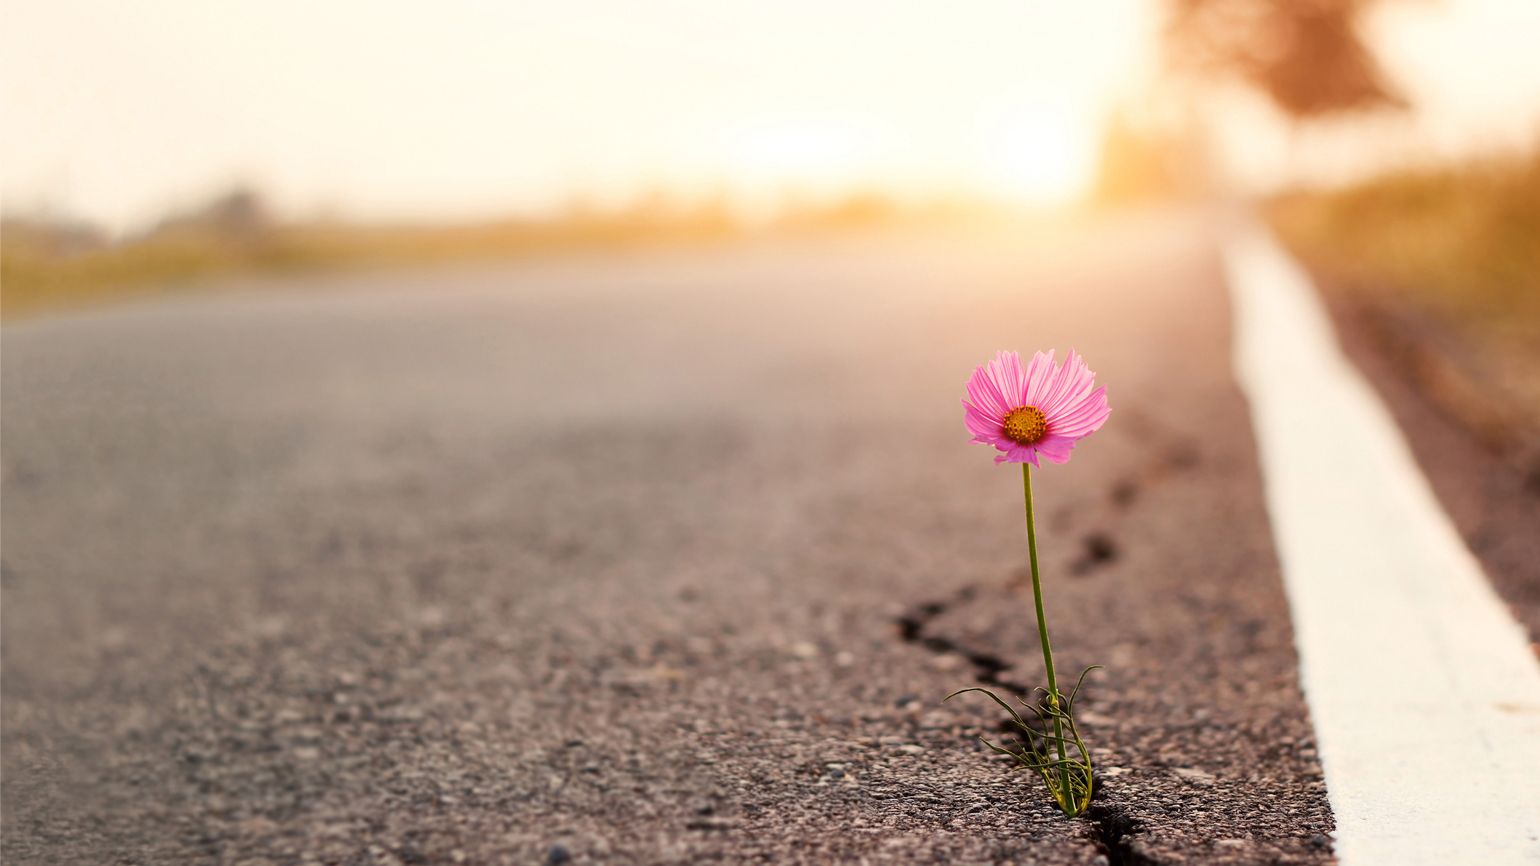 Pink flower growing on cracked street; Getty Images